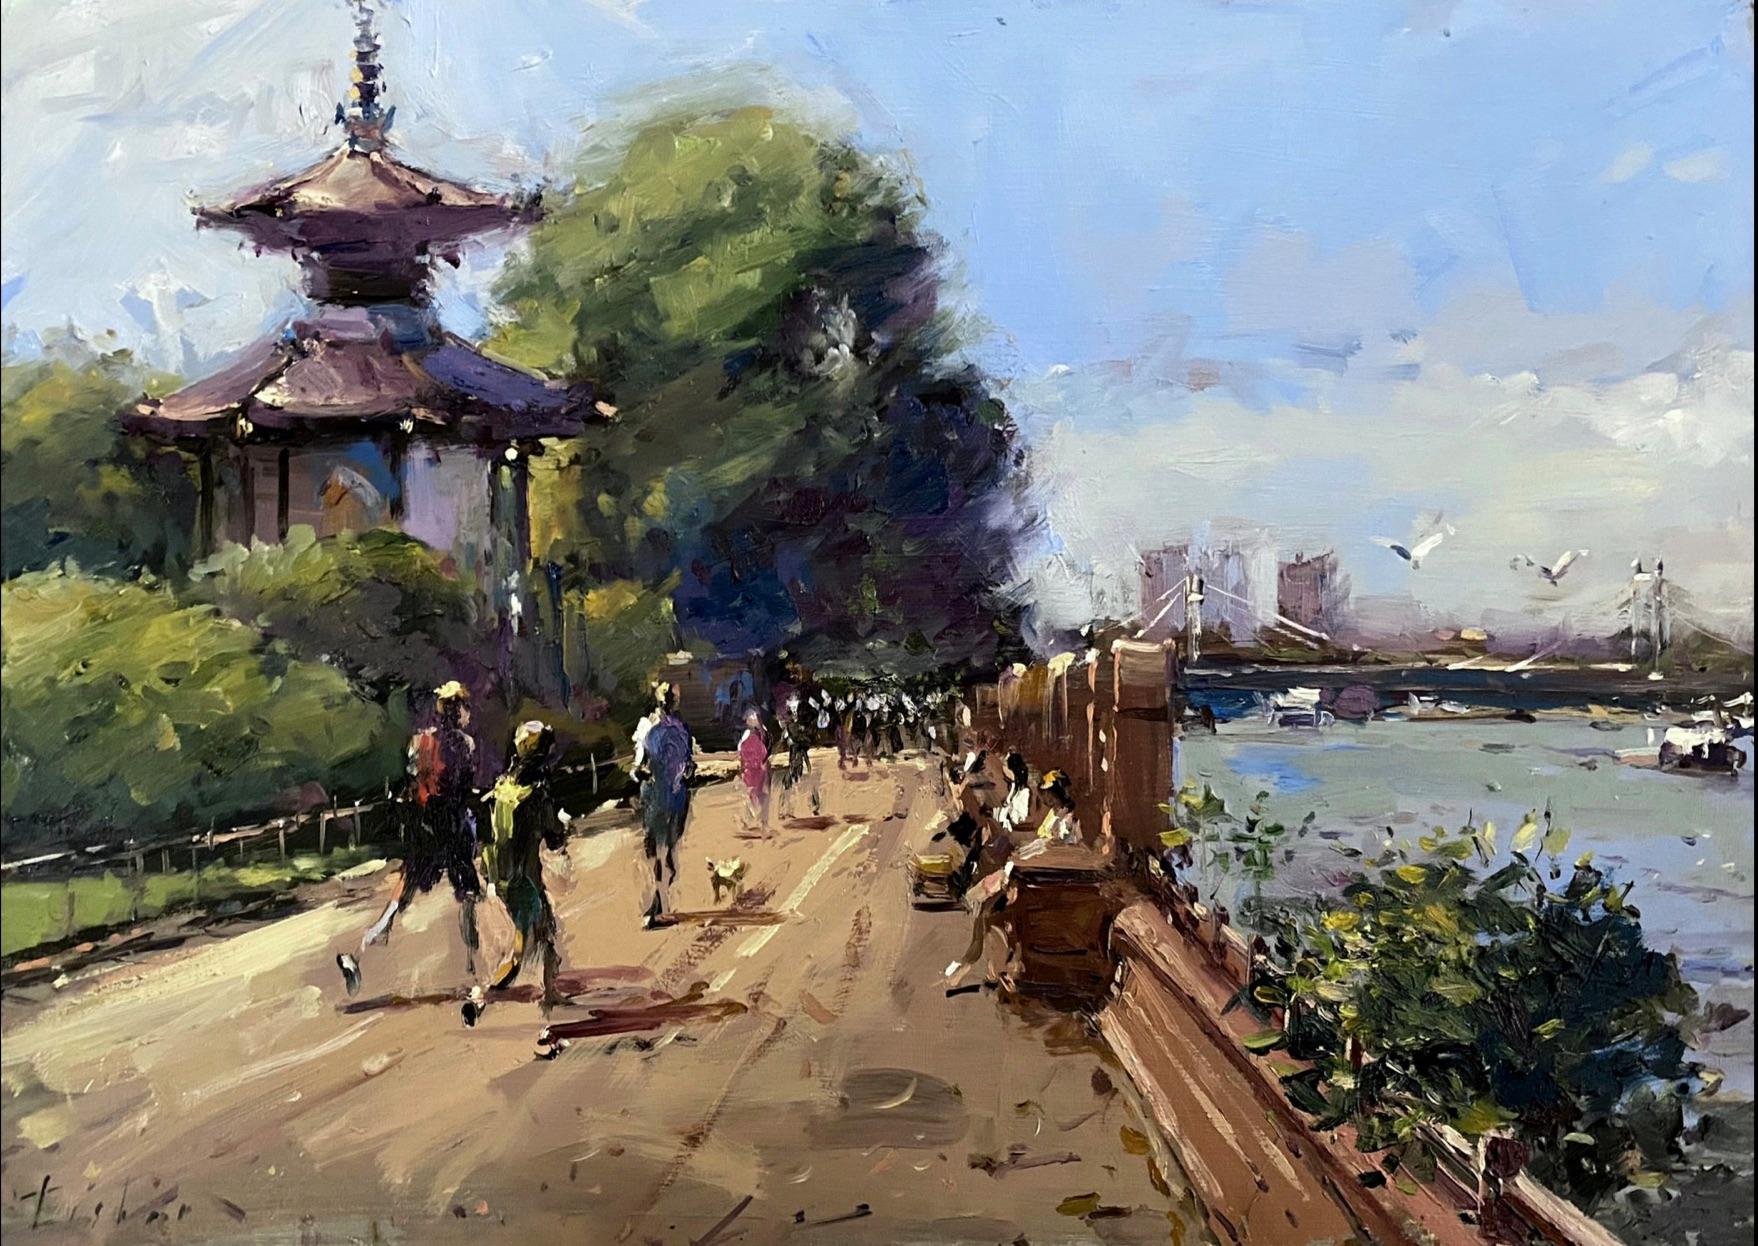 Joggers at Battersea Park-original impressionism cityscape oil painting-Artwork - Impressionist Painting by Tushar Sabale